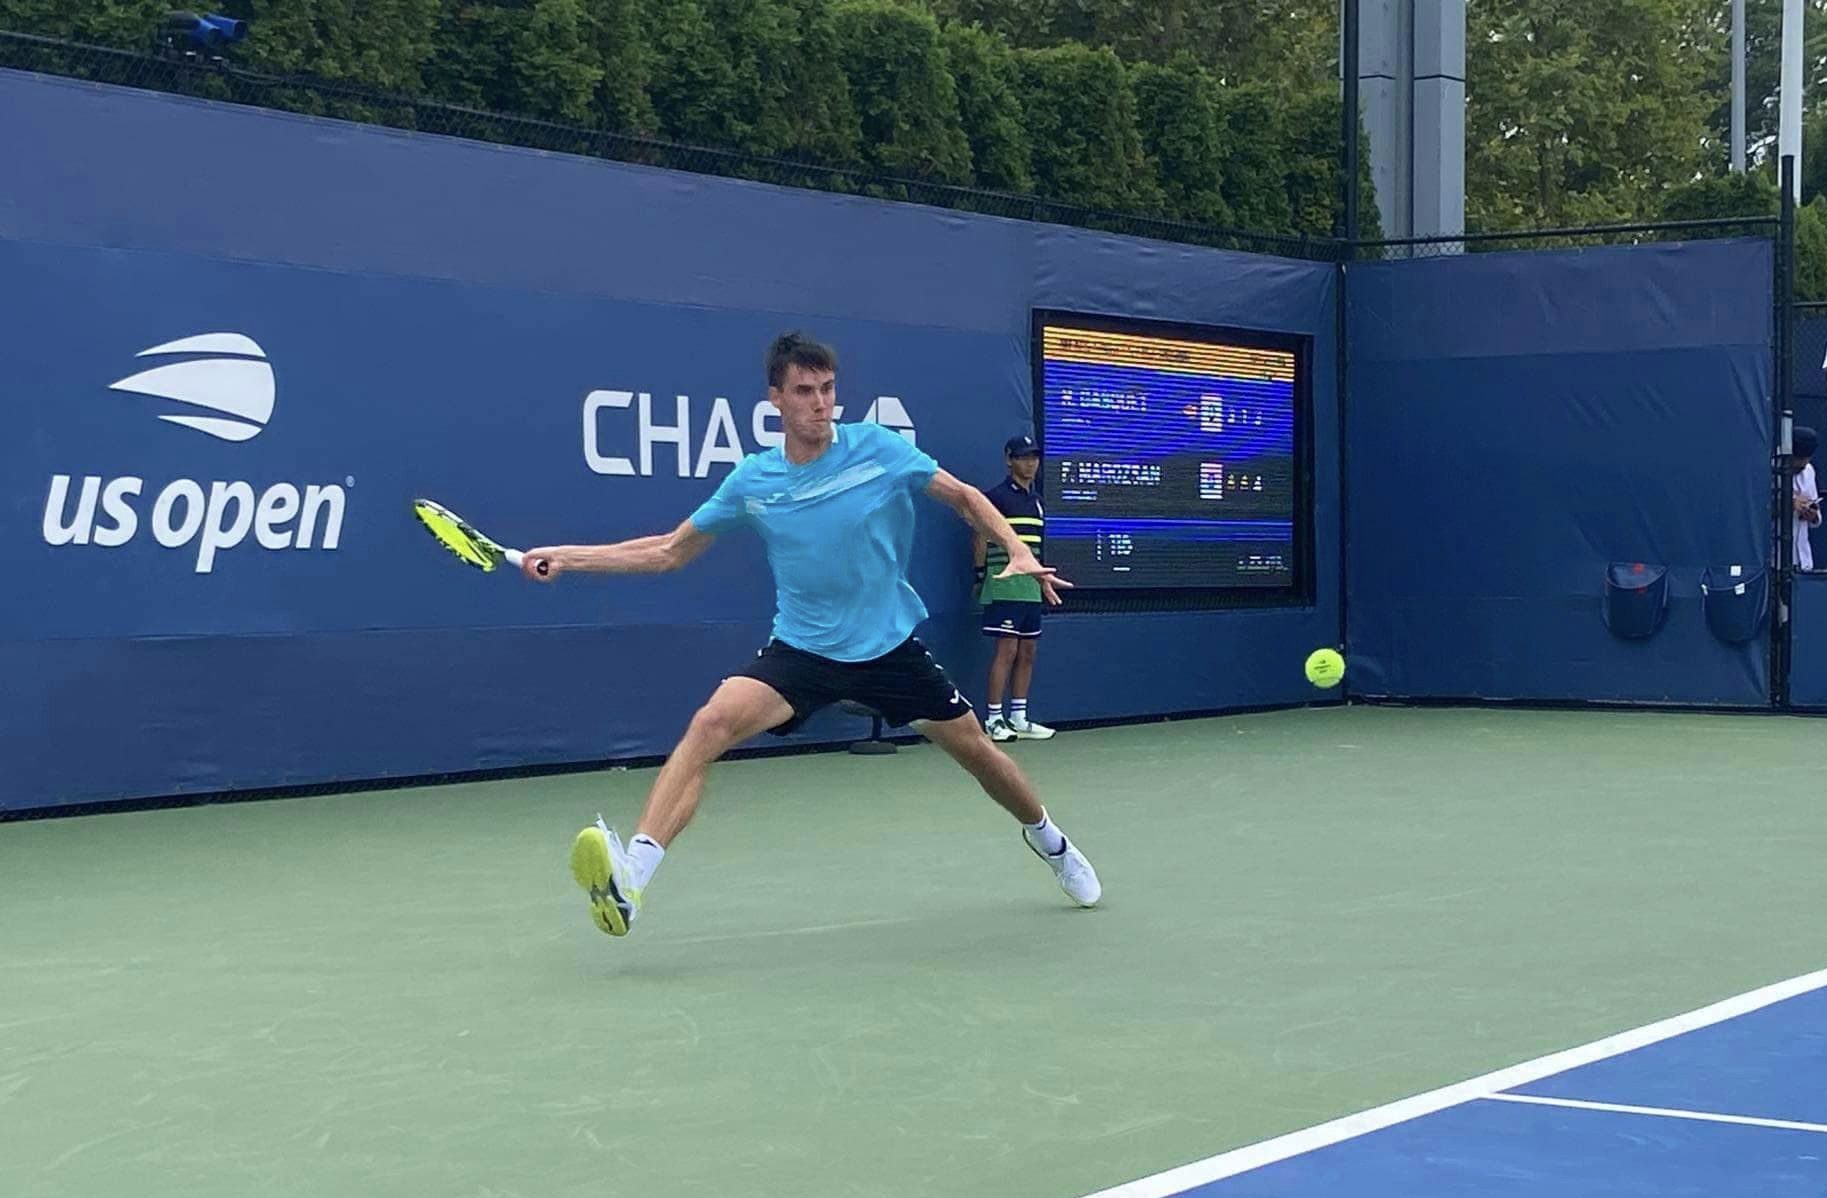 Hungarian Tennis Player off to a Great Start at US Open